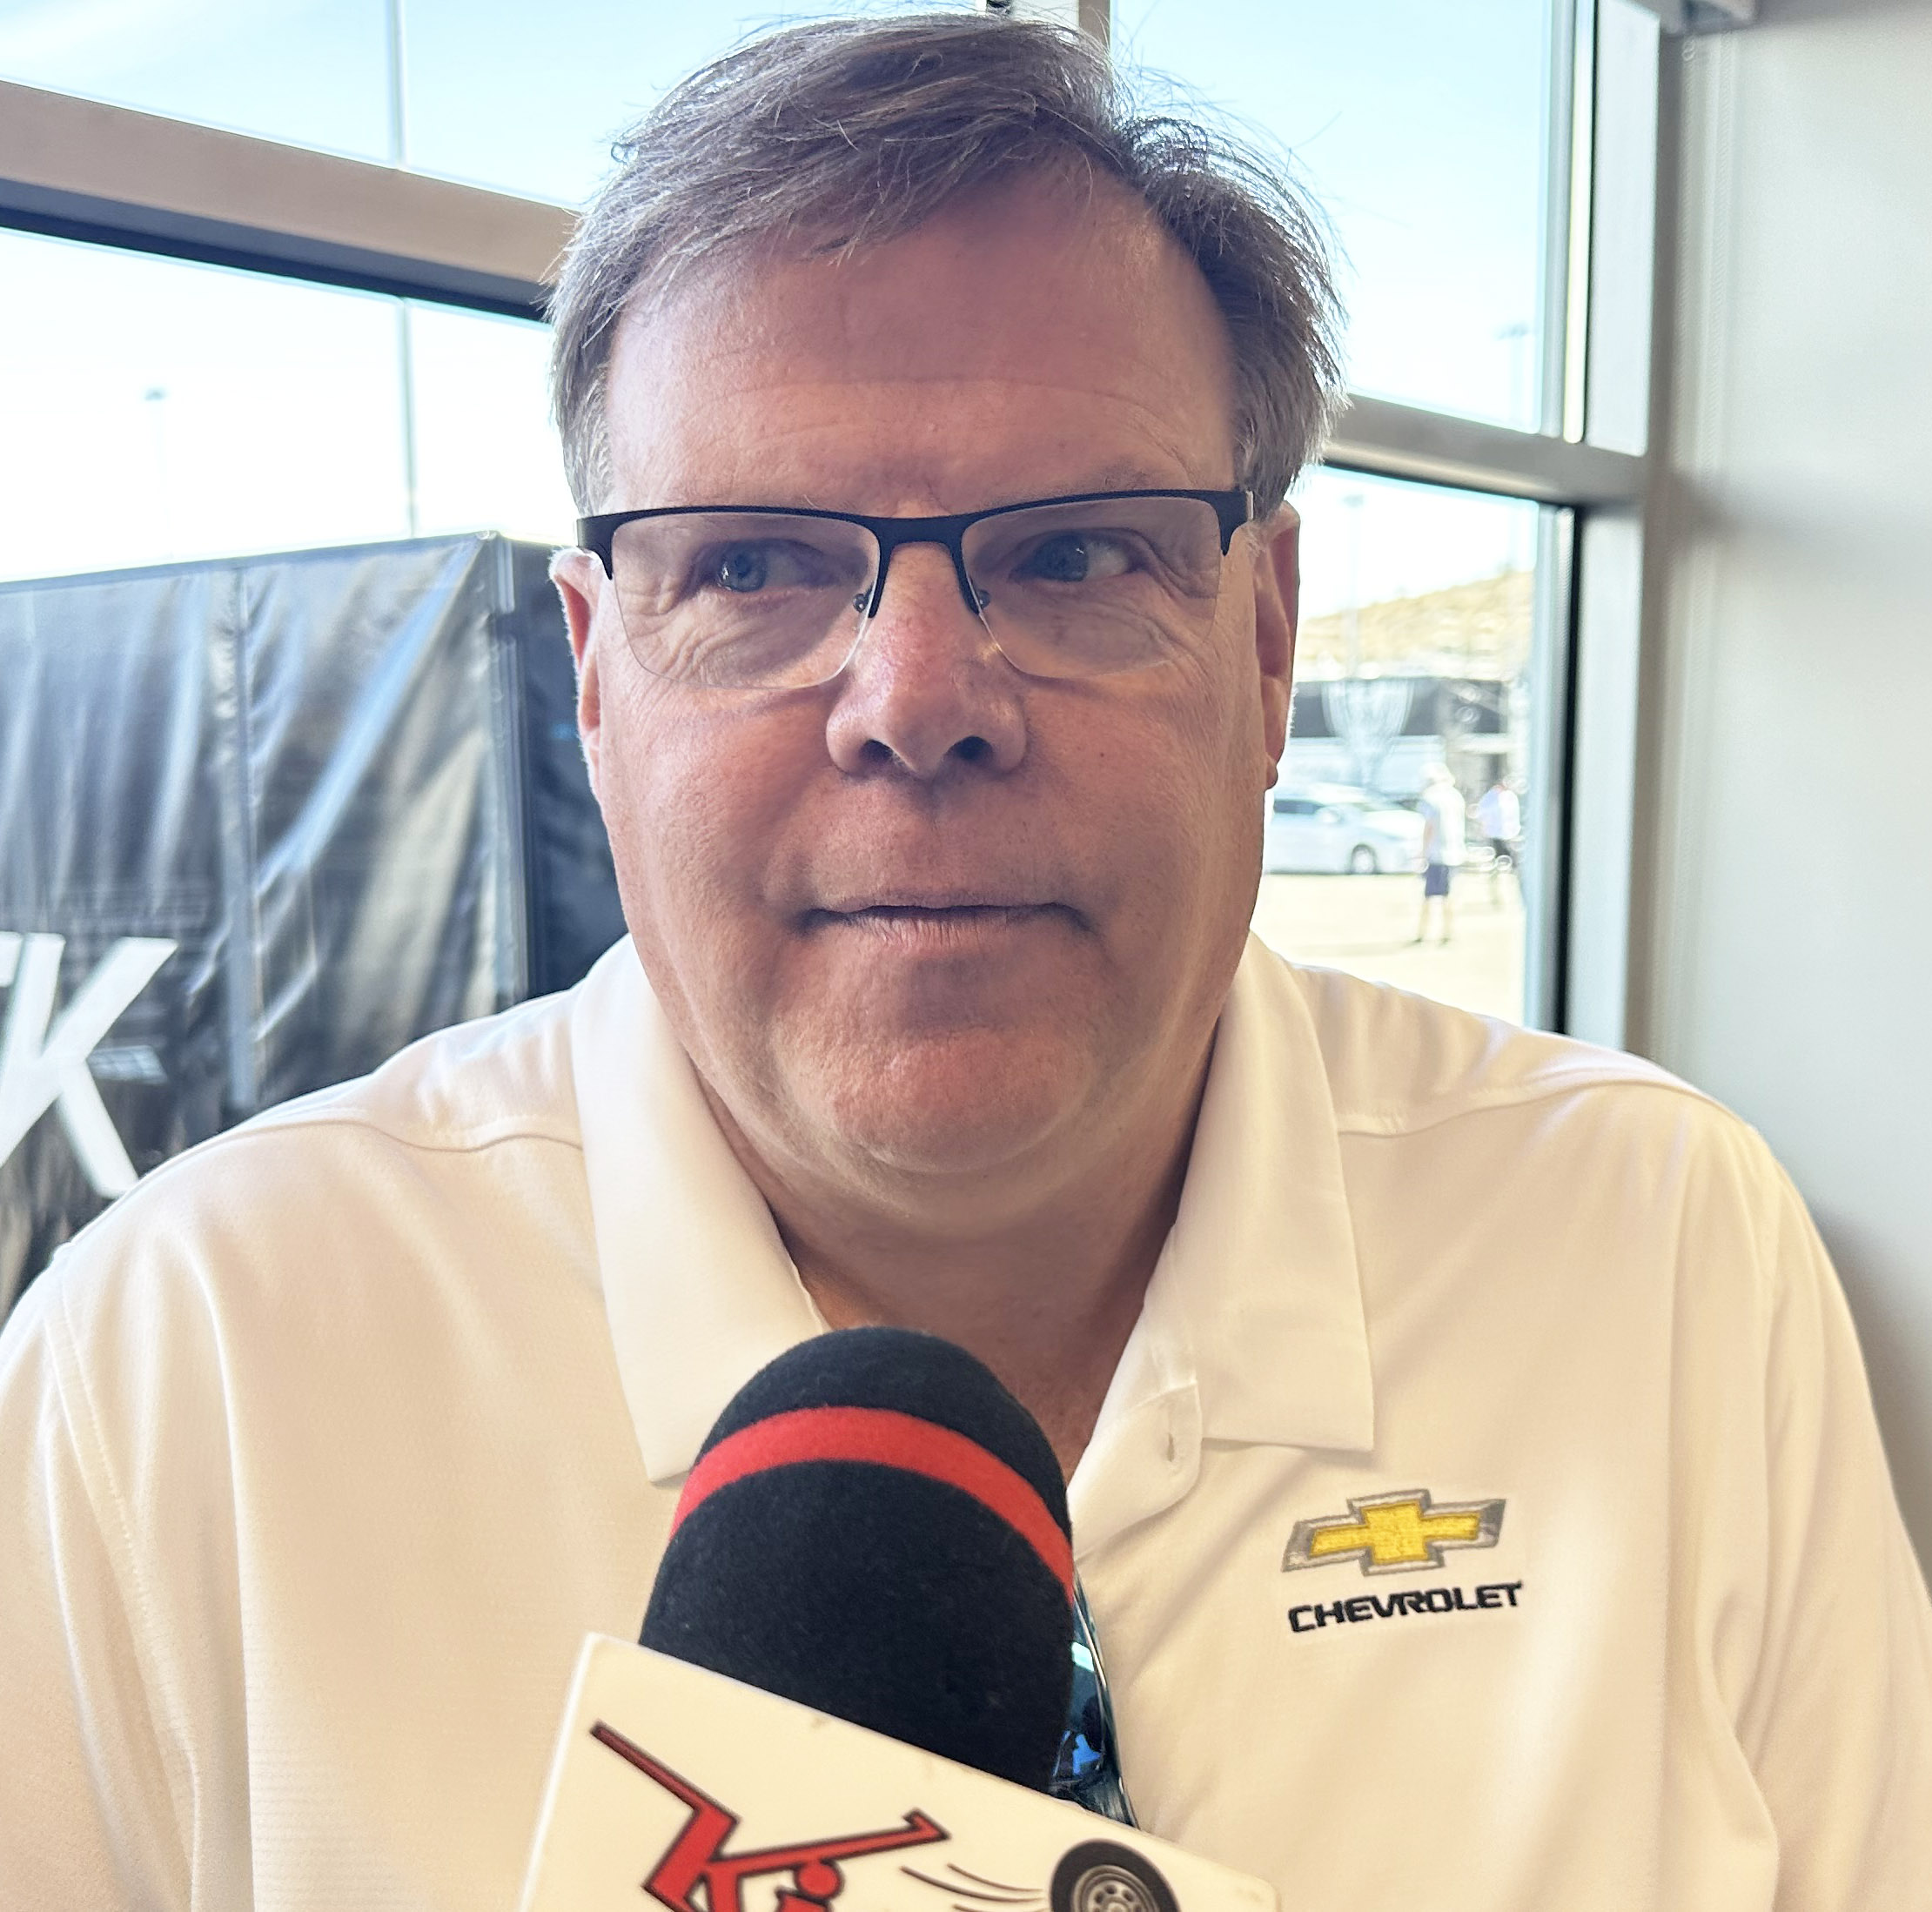 Jim campbell, chevrolet v. P. Performance vehicles and motorsports